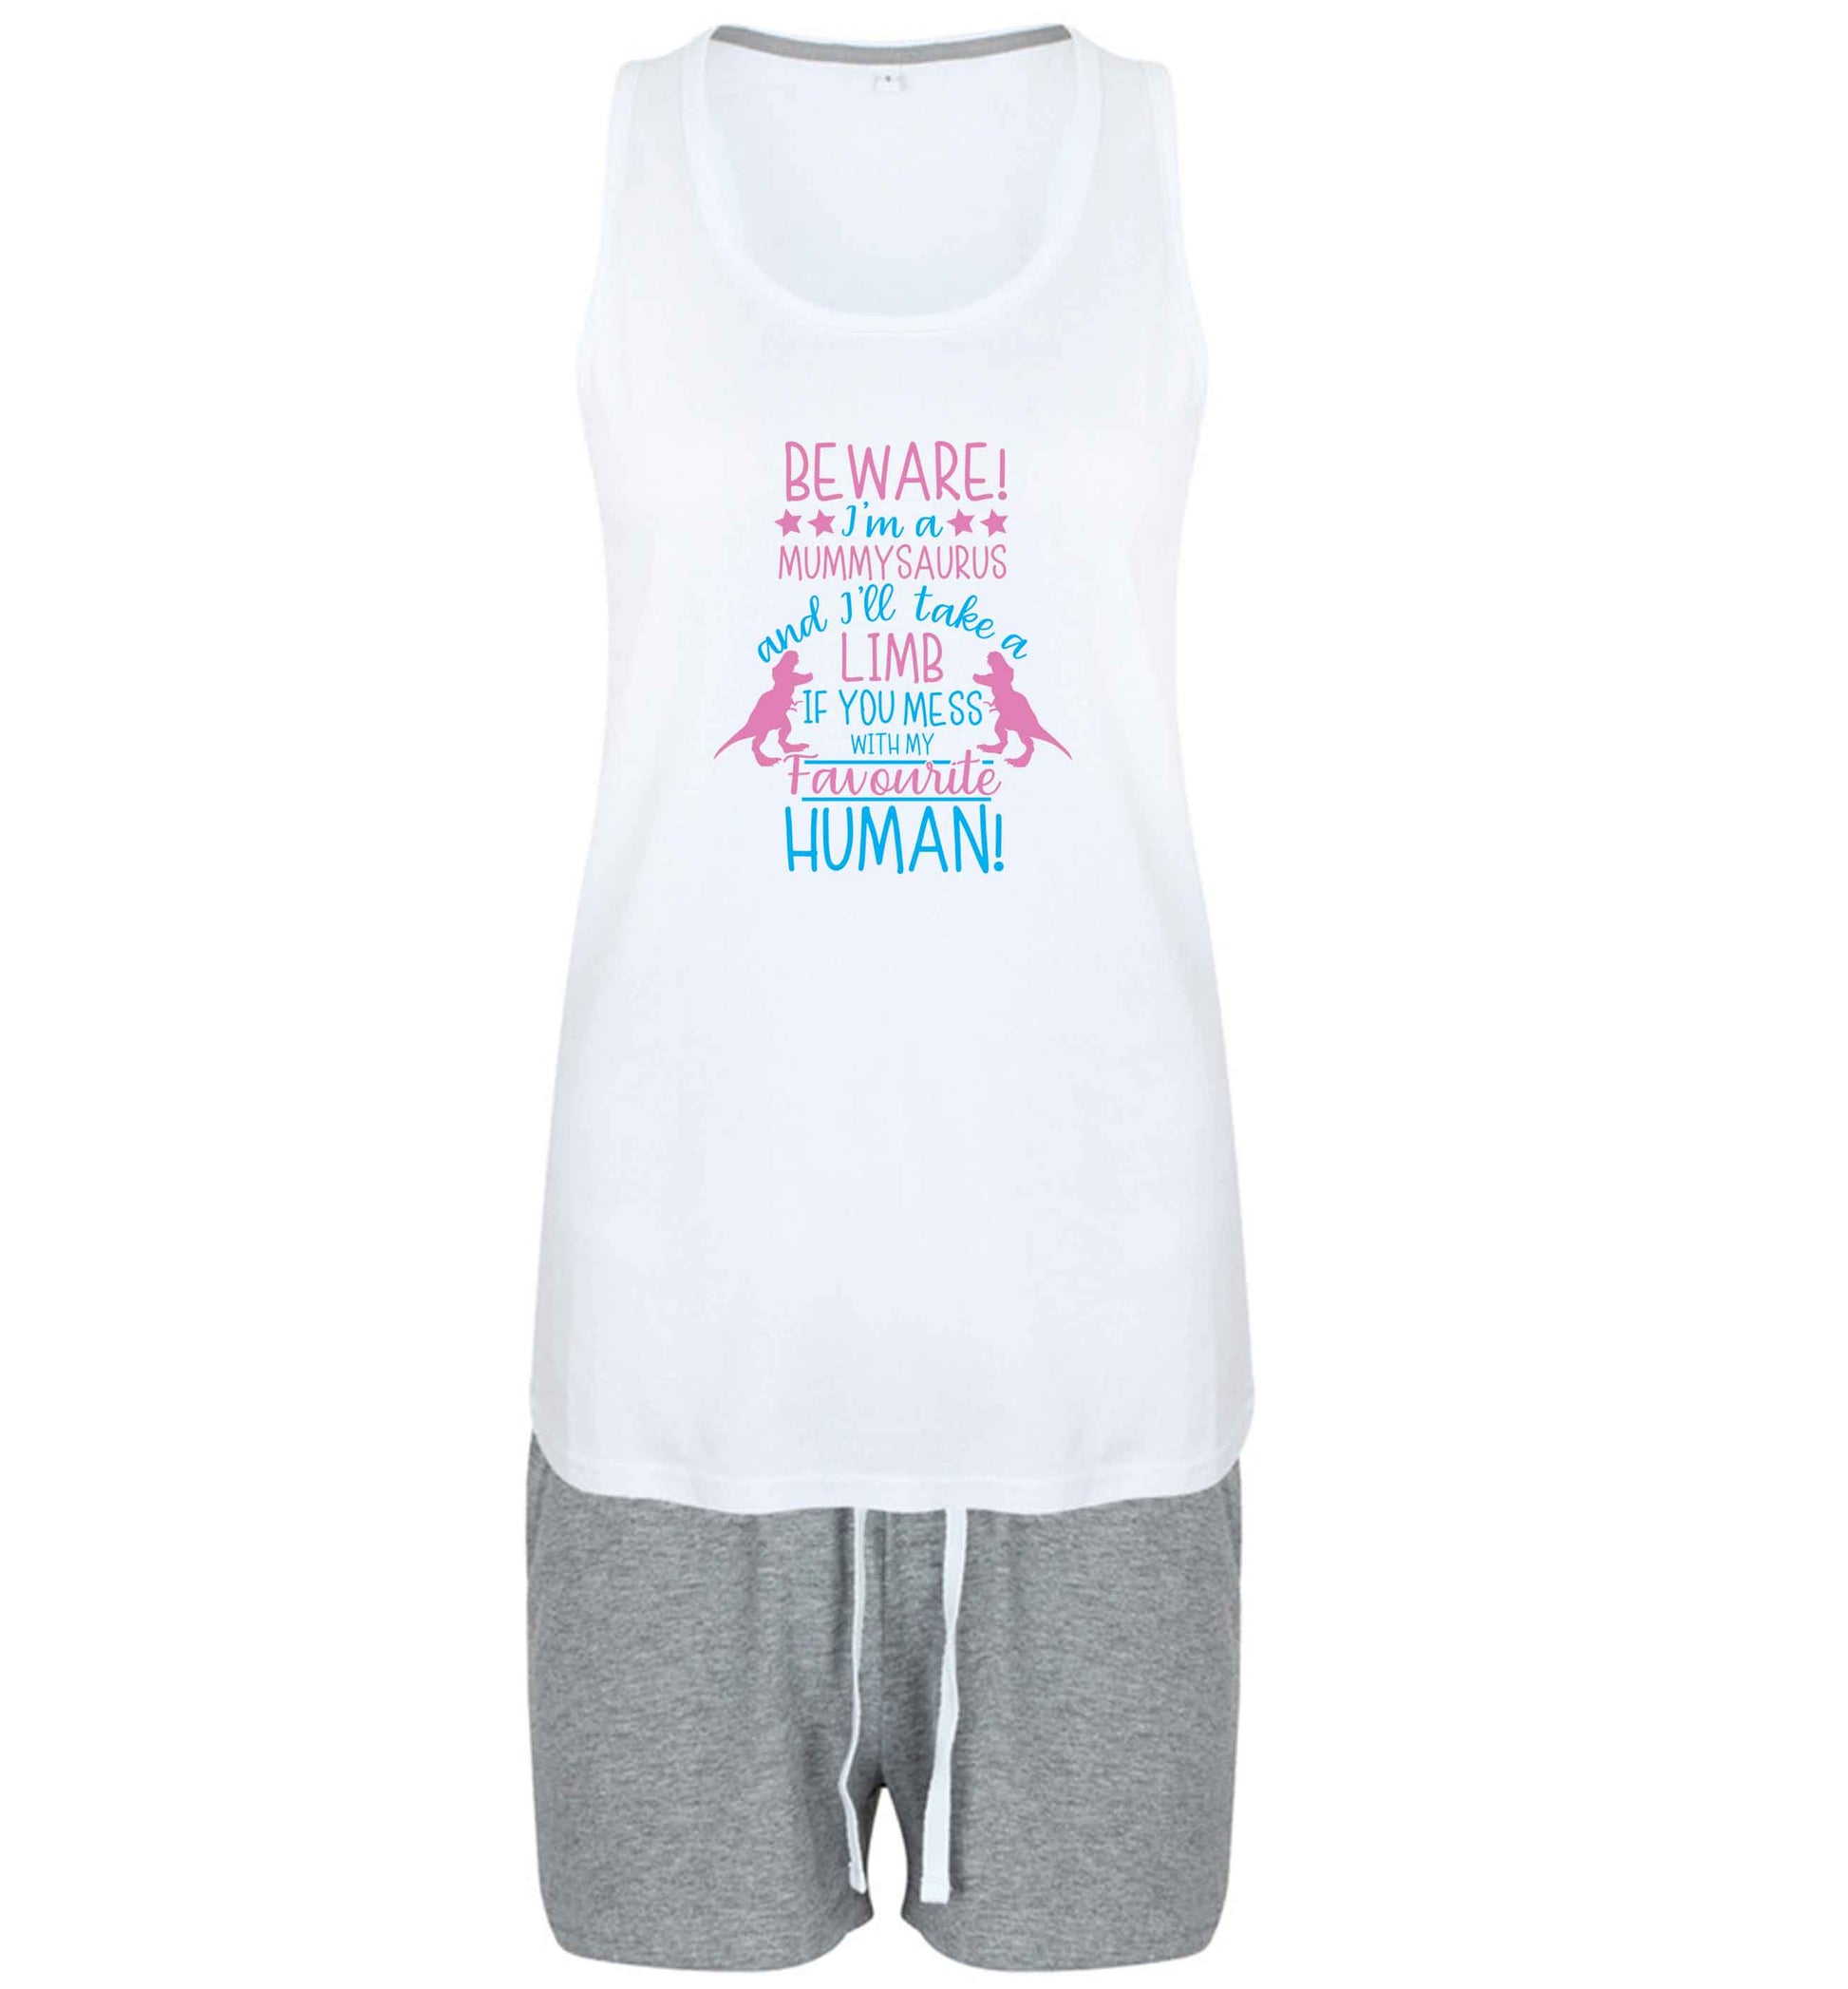 Perfect gift for any protective mummysaurus! Beware I'm a mummysaurus and I'll take a limb if you mess with my favourite human size XL women's pyjama shorts set in pink 